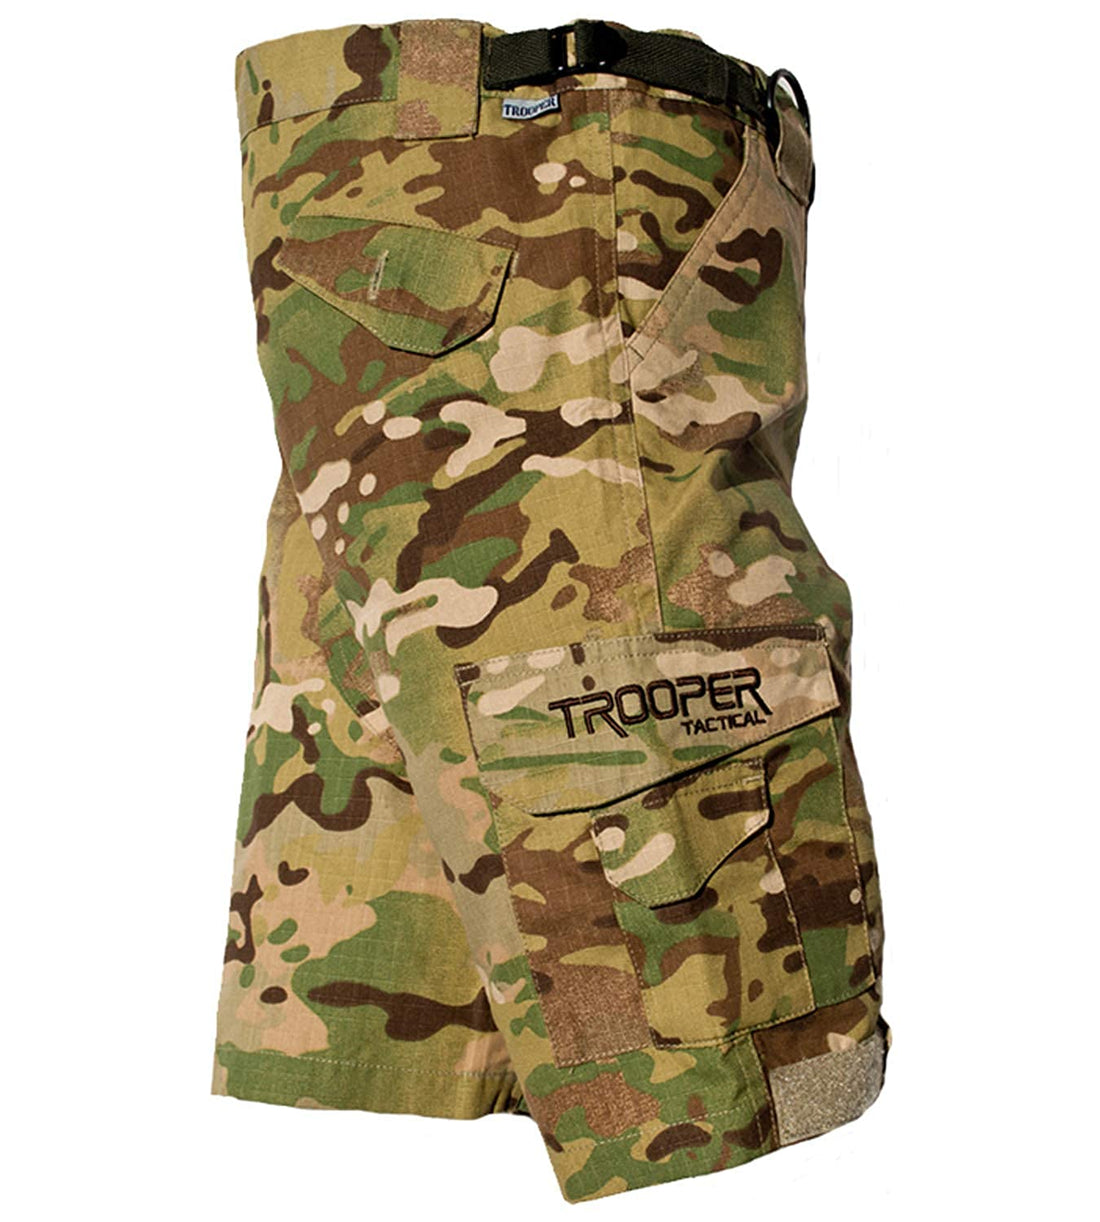 Trendy Apparel Shop Kid's US Soldier Classic Camouflage Tactical Shorts - Multicam